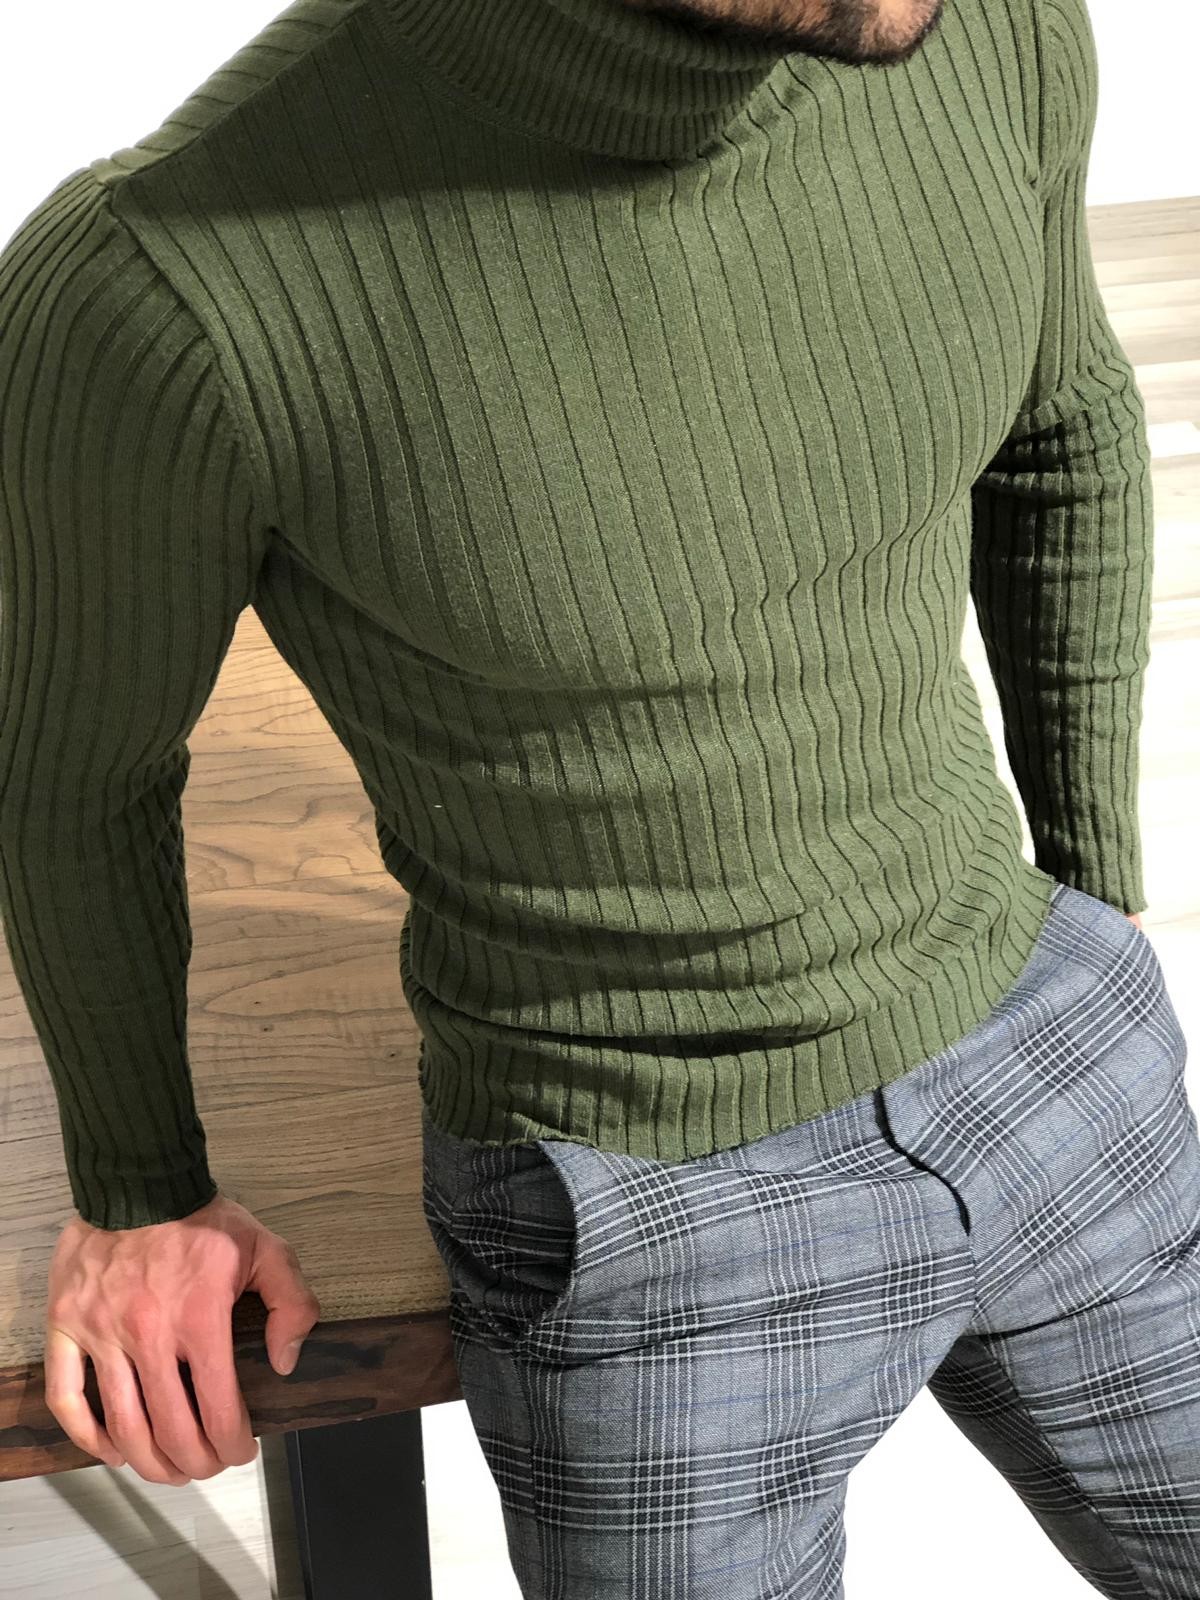 Buy Khaki Slim Fit Turtleneck Sweater by Gentwith.com with Free Shipping